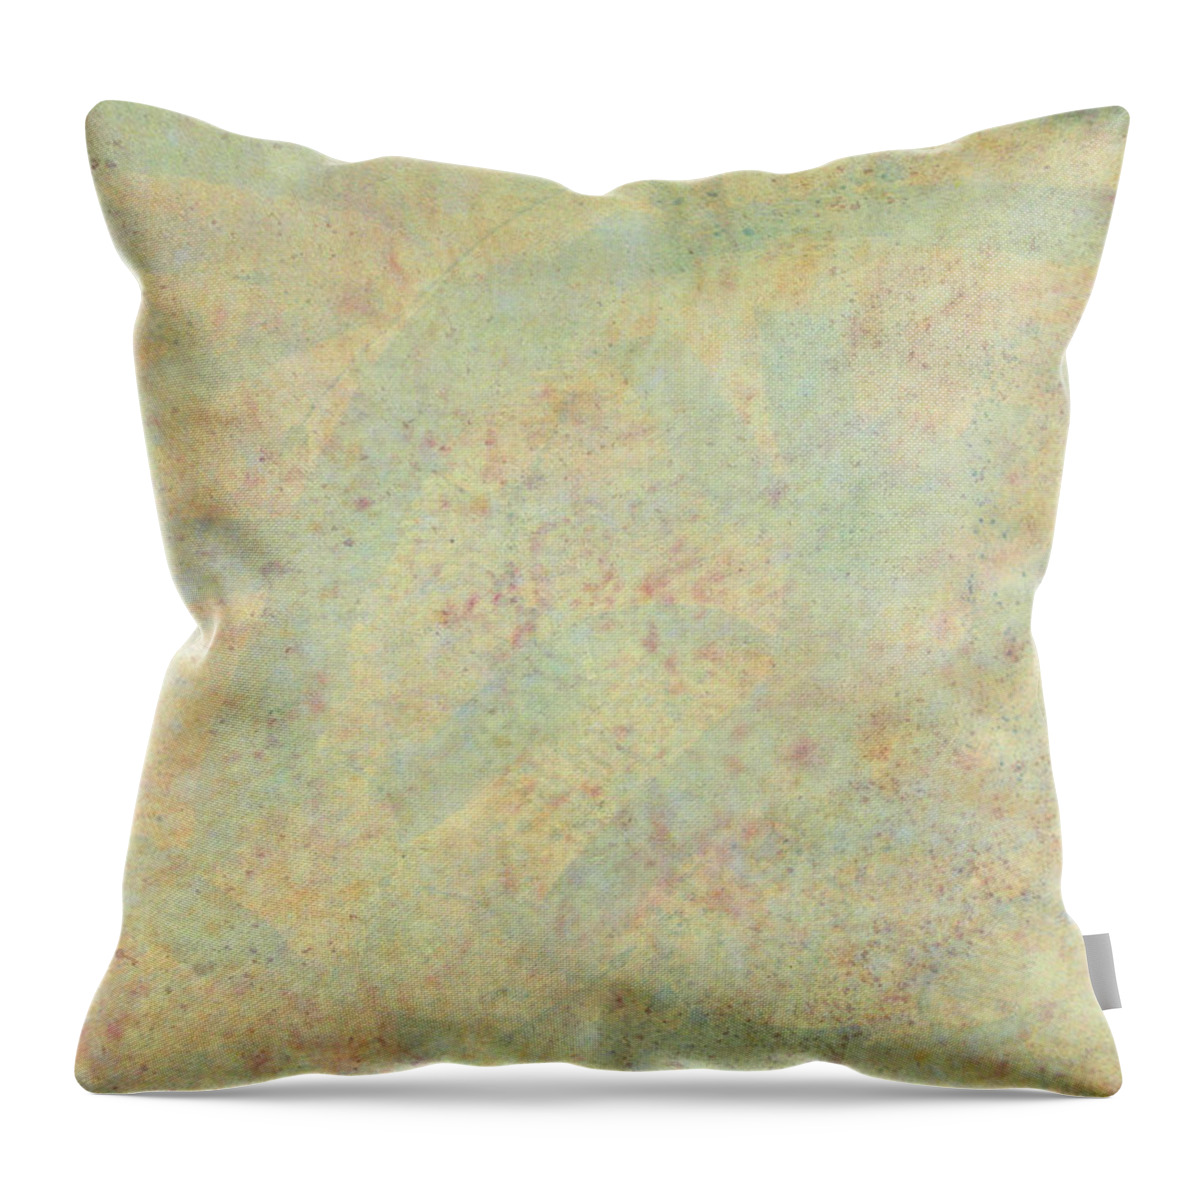 Minimal Throw Pillow featuring the painting Minimal number 4 by James W Johnson